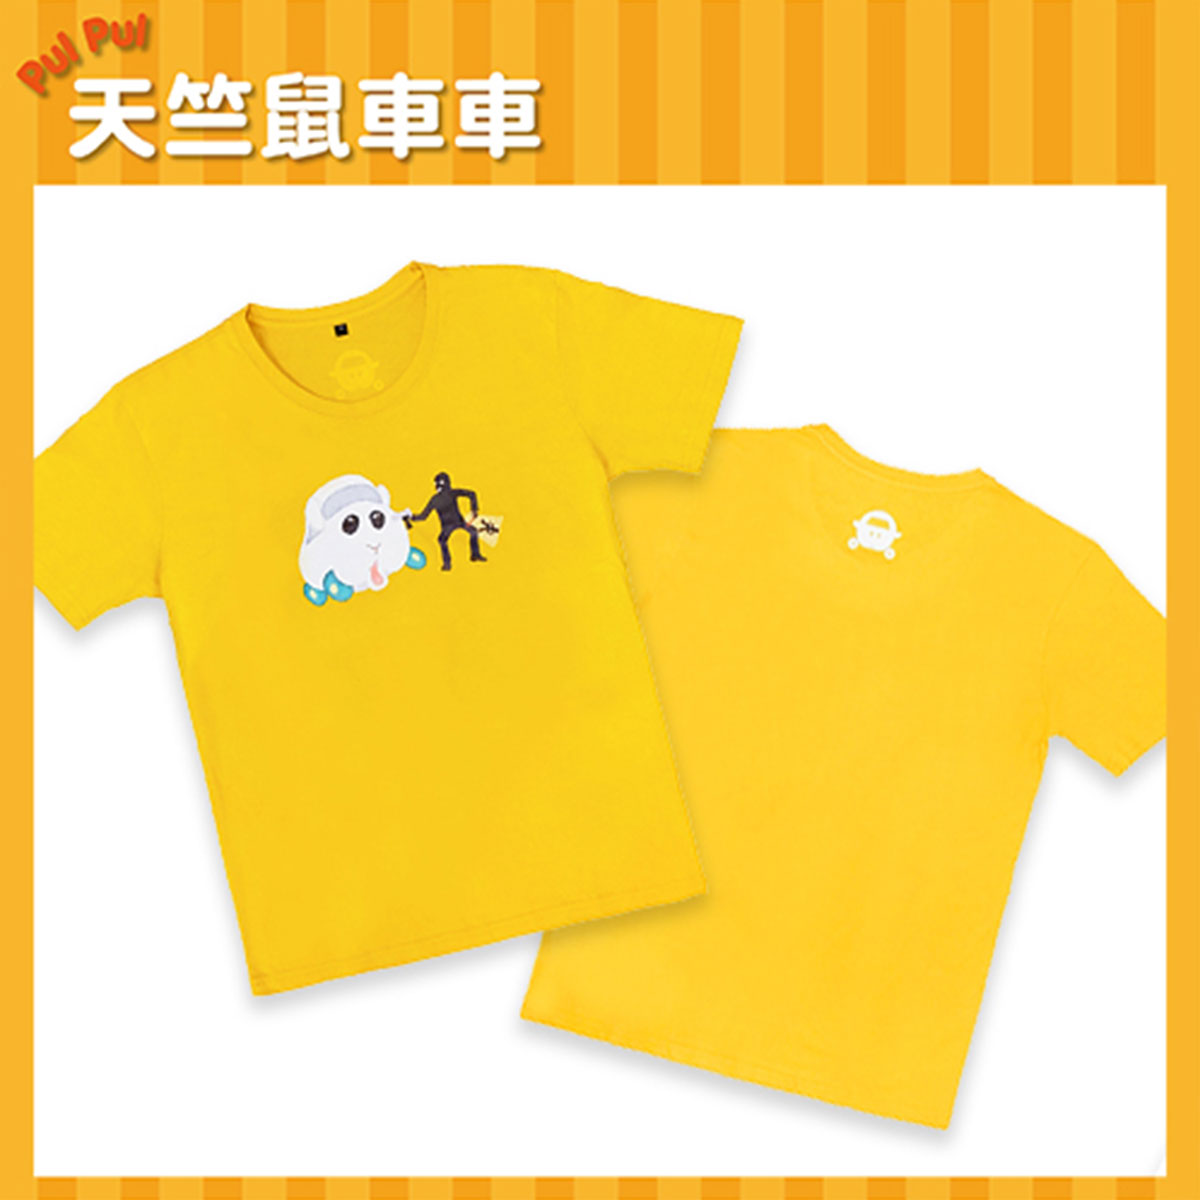 Pui Pui 天竺鼠車車 T-shirt 搶劫 黑色 服裝 Microworks Online Store